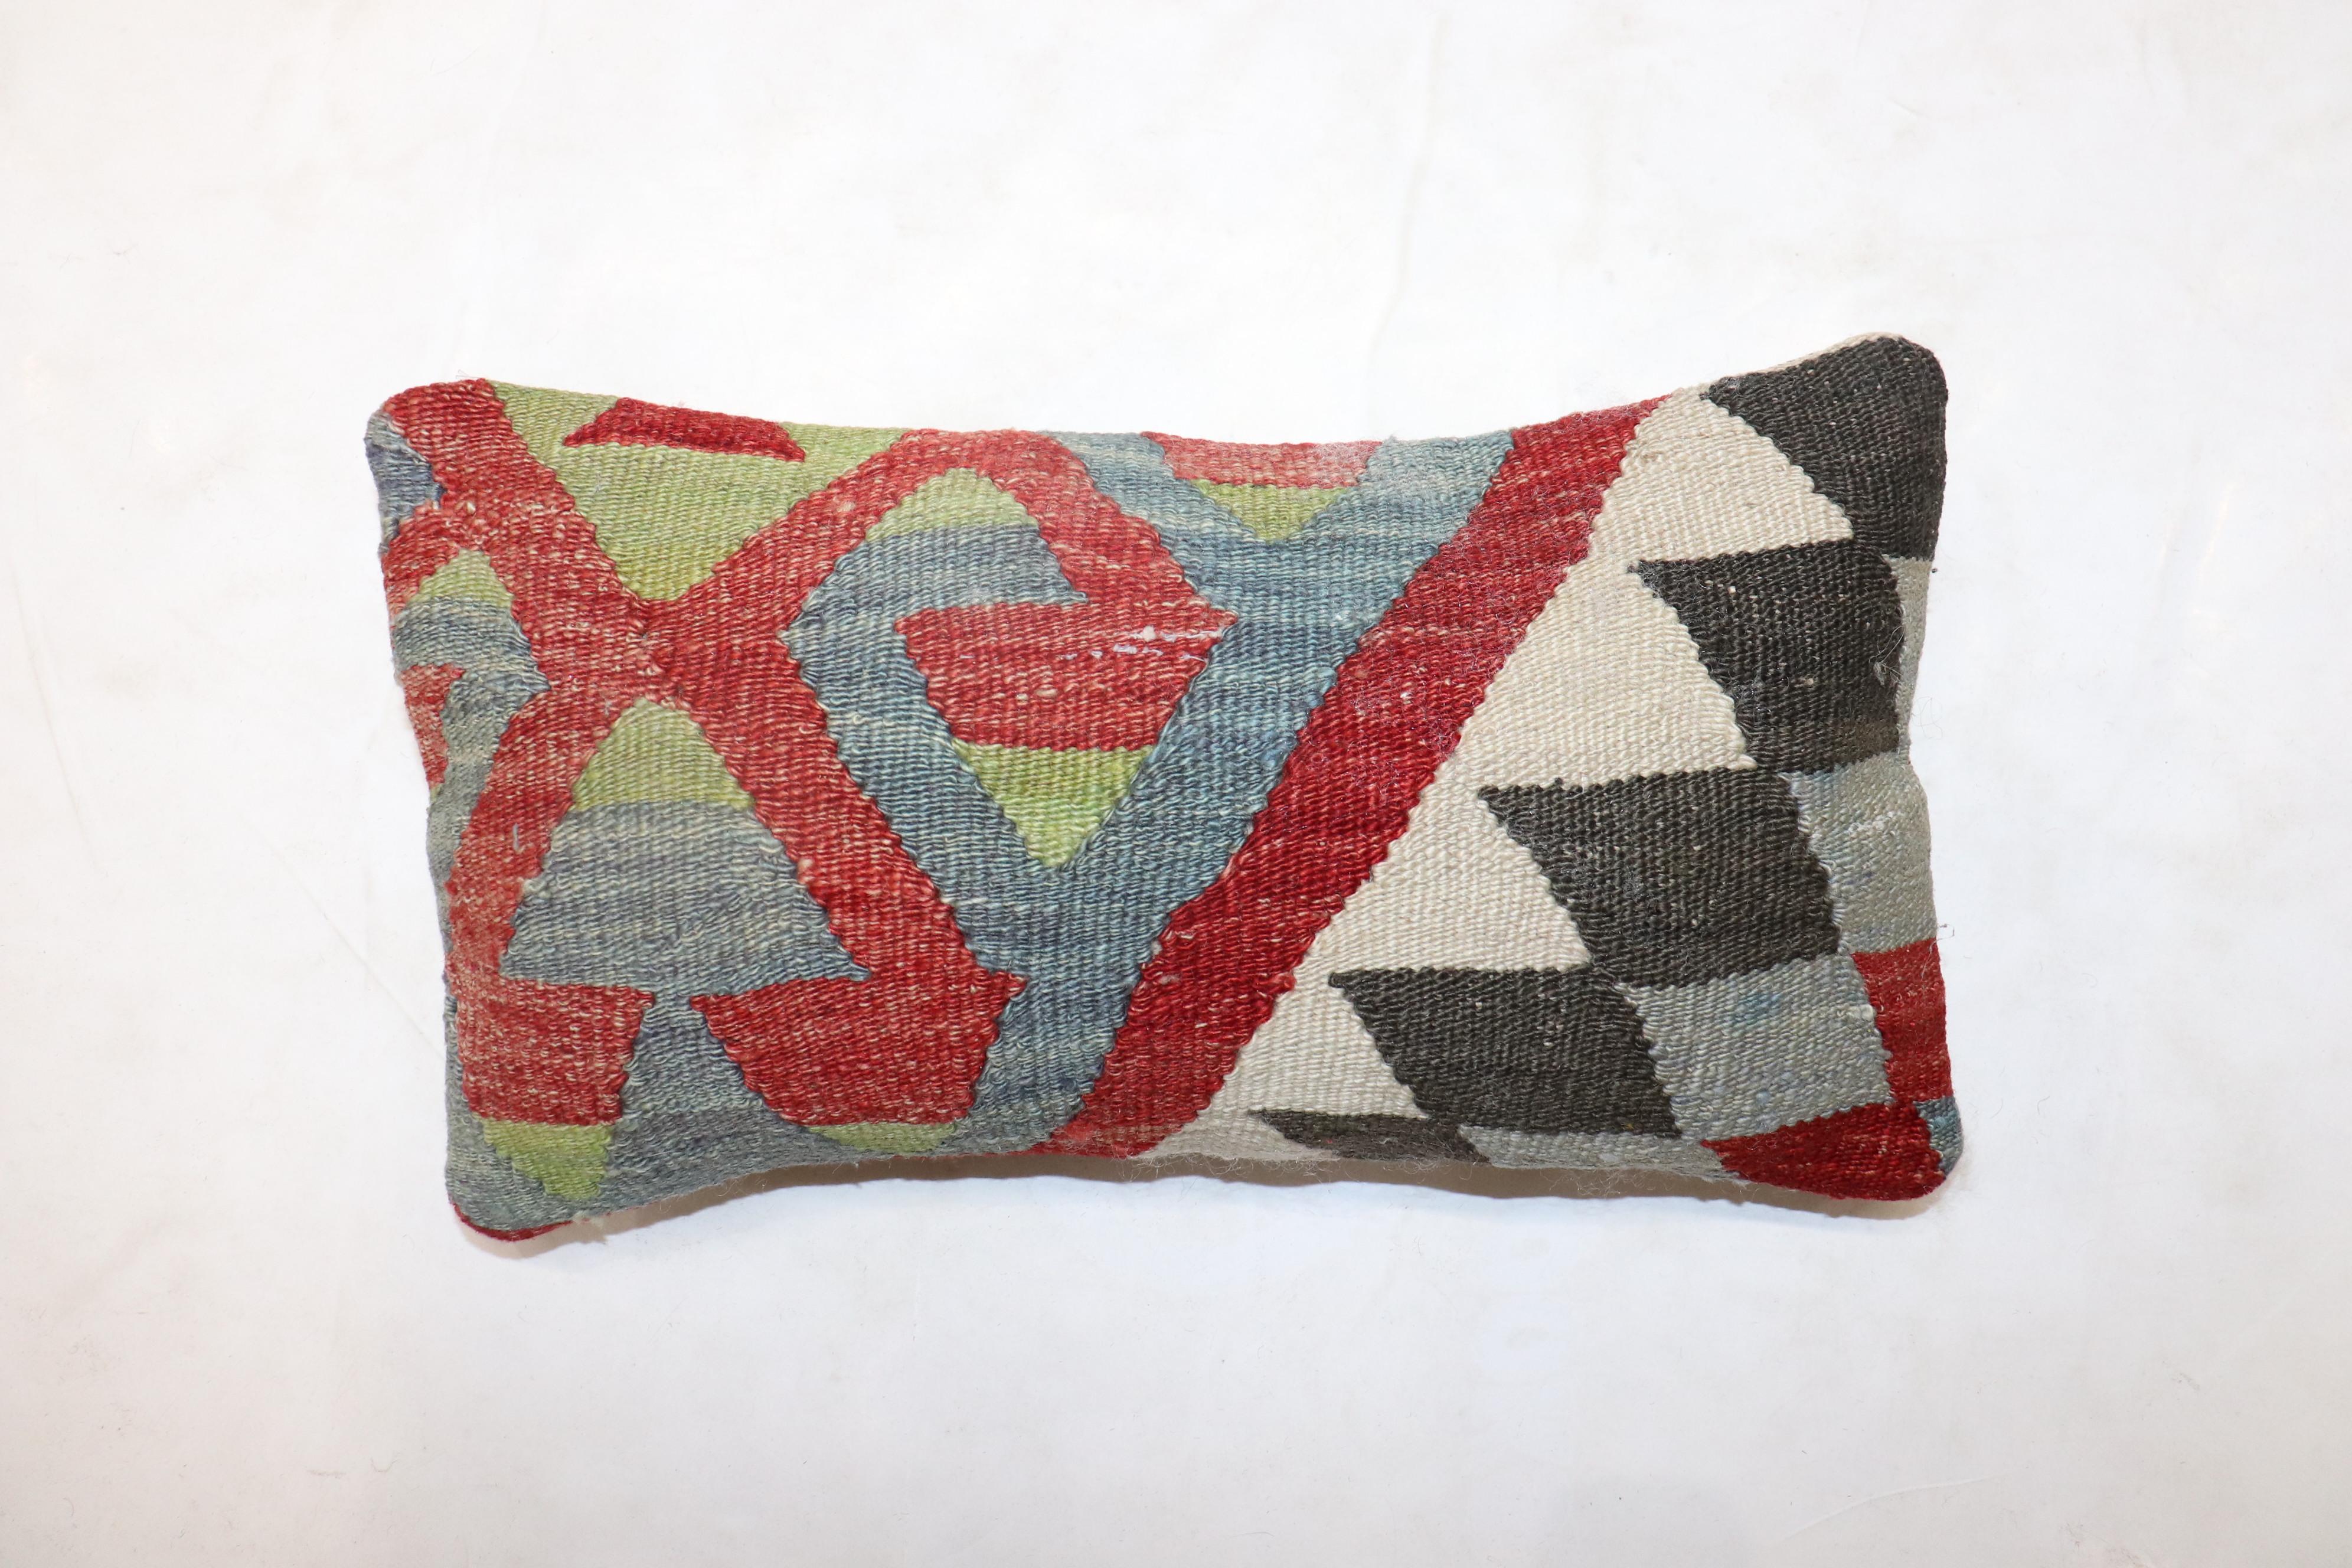 Small size pillow made from an antique Turkish Kilim flat-weave. 

Measures: 9” x 16''.